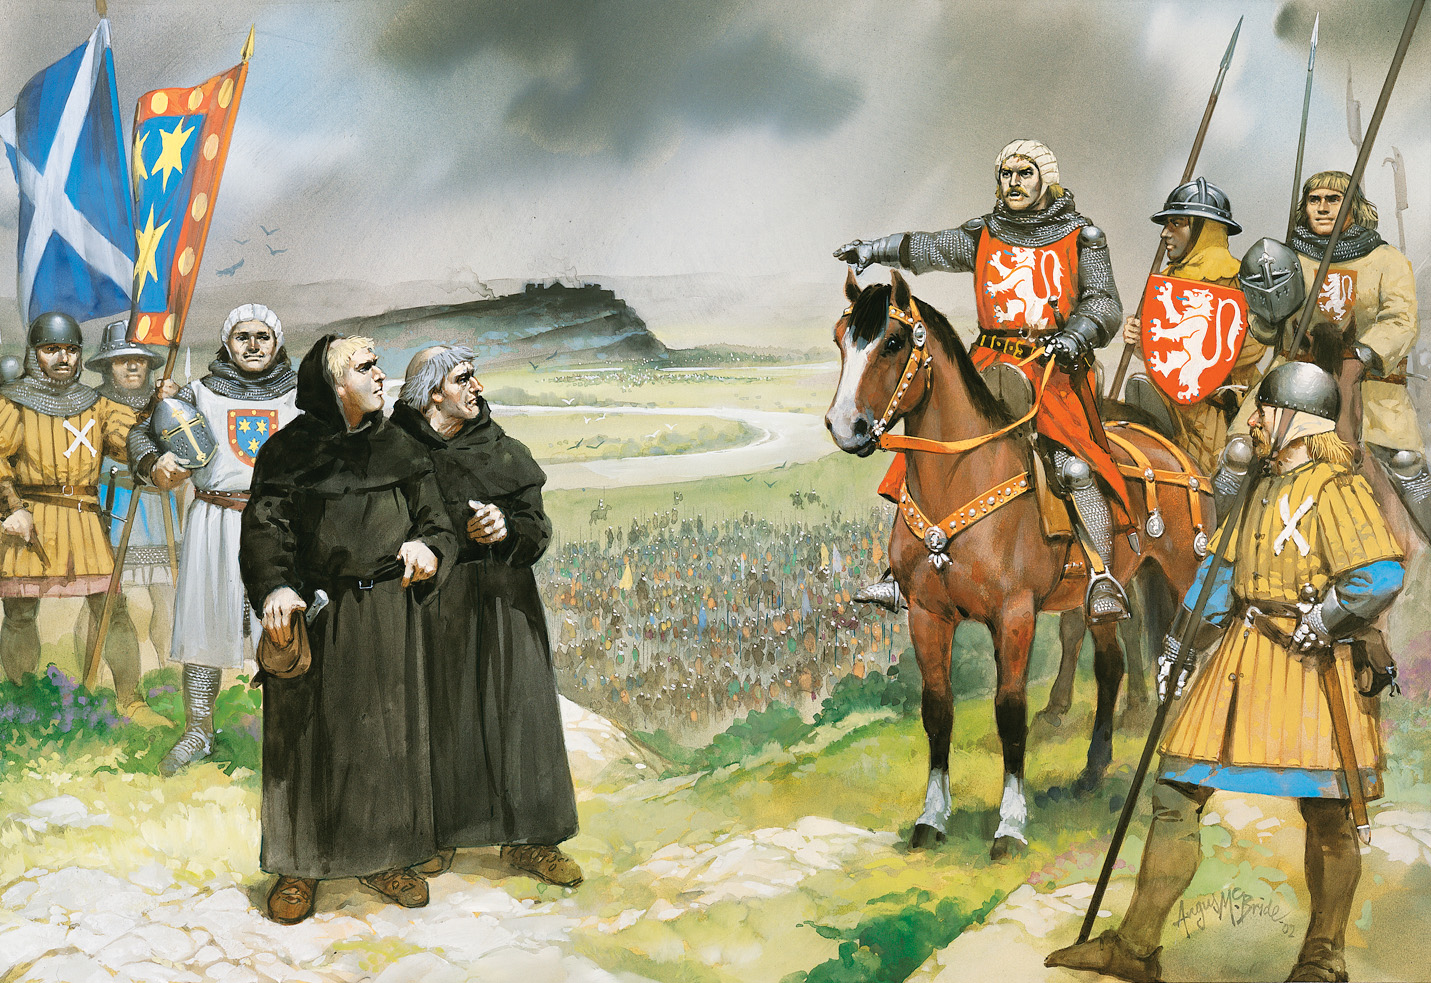 Two Blackfriars unsuccessfully entreat a mounted William Wallace to surrender before the battle. Andrew Murray stands behind the monks in this painting by Angus McBride. 